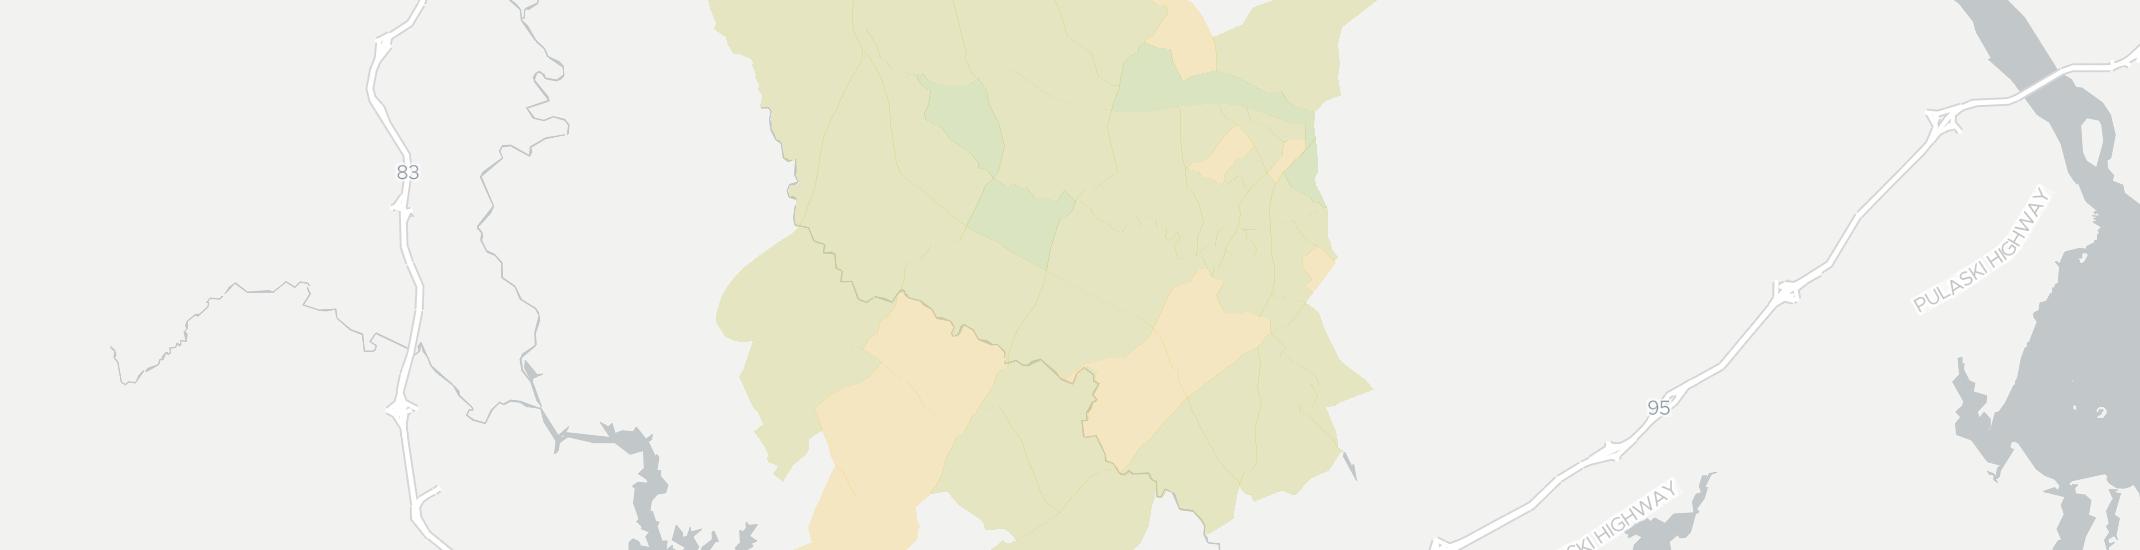 Fallston Internet Competition Map. Click for interactive map.